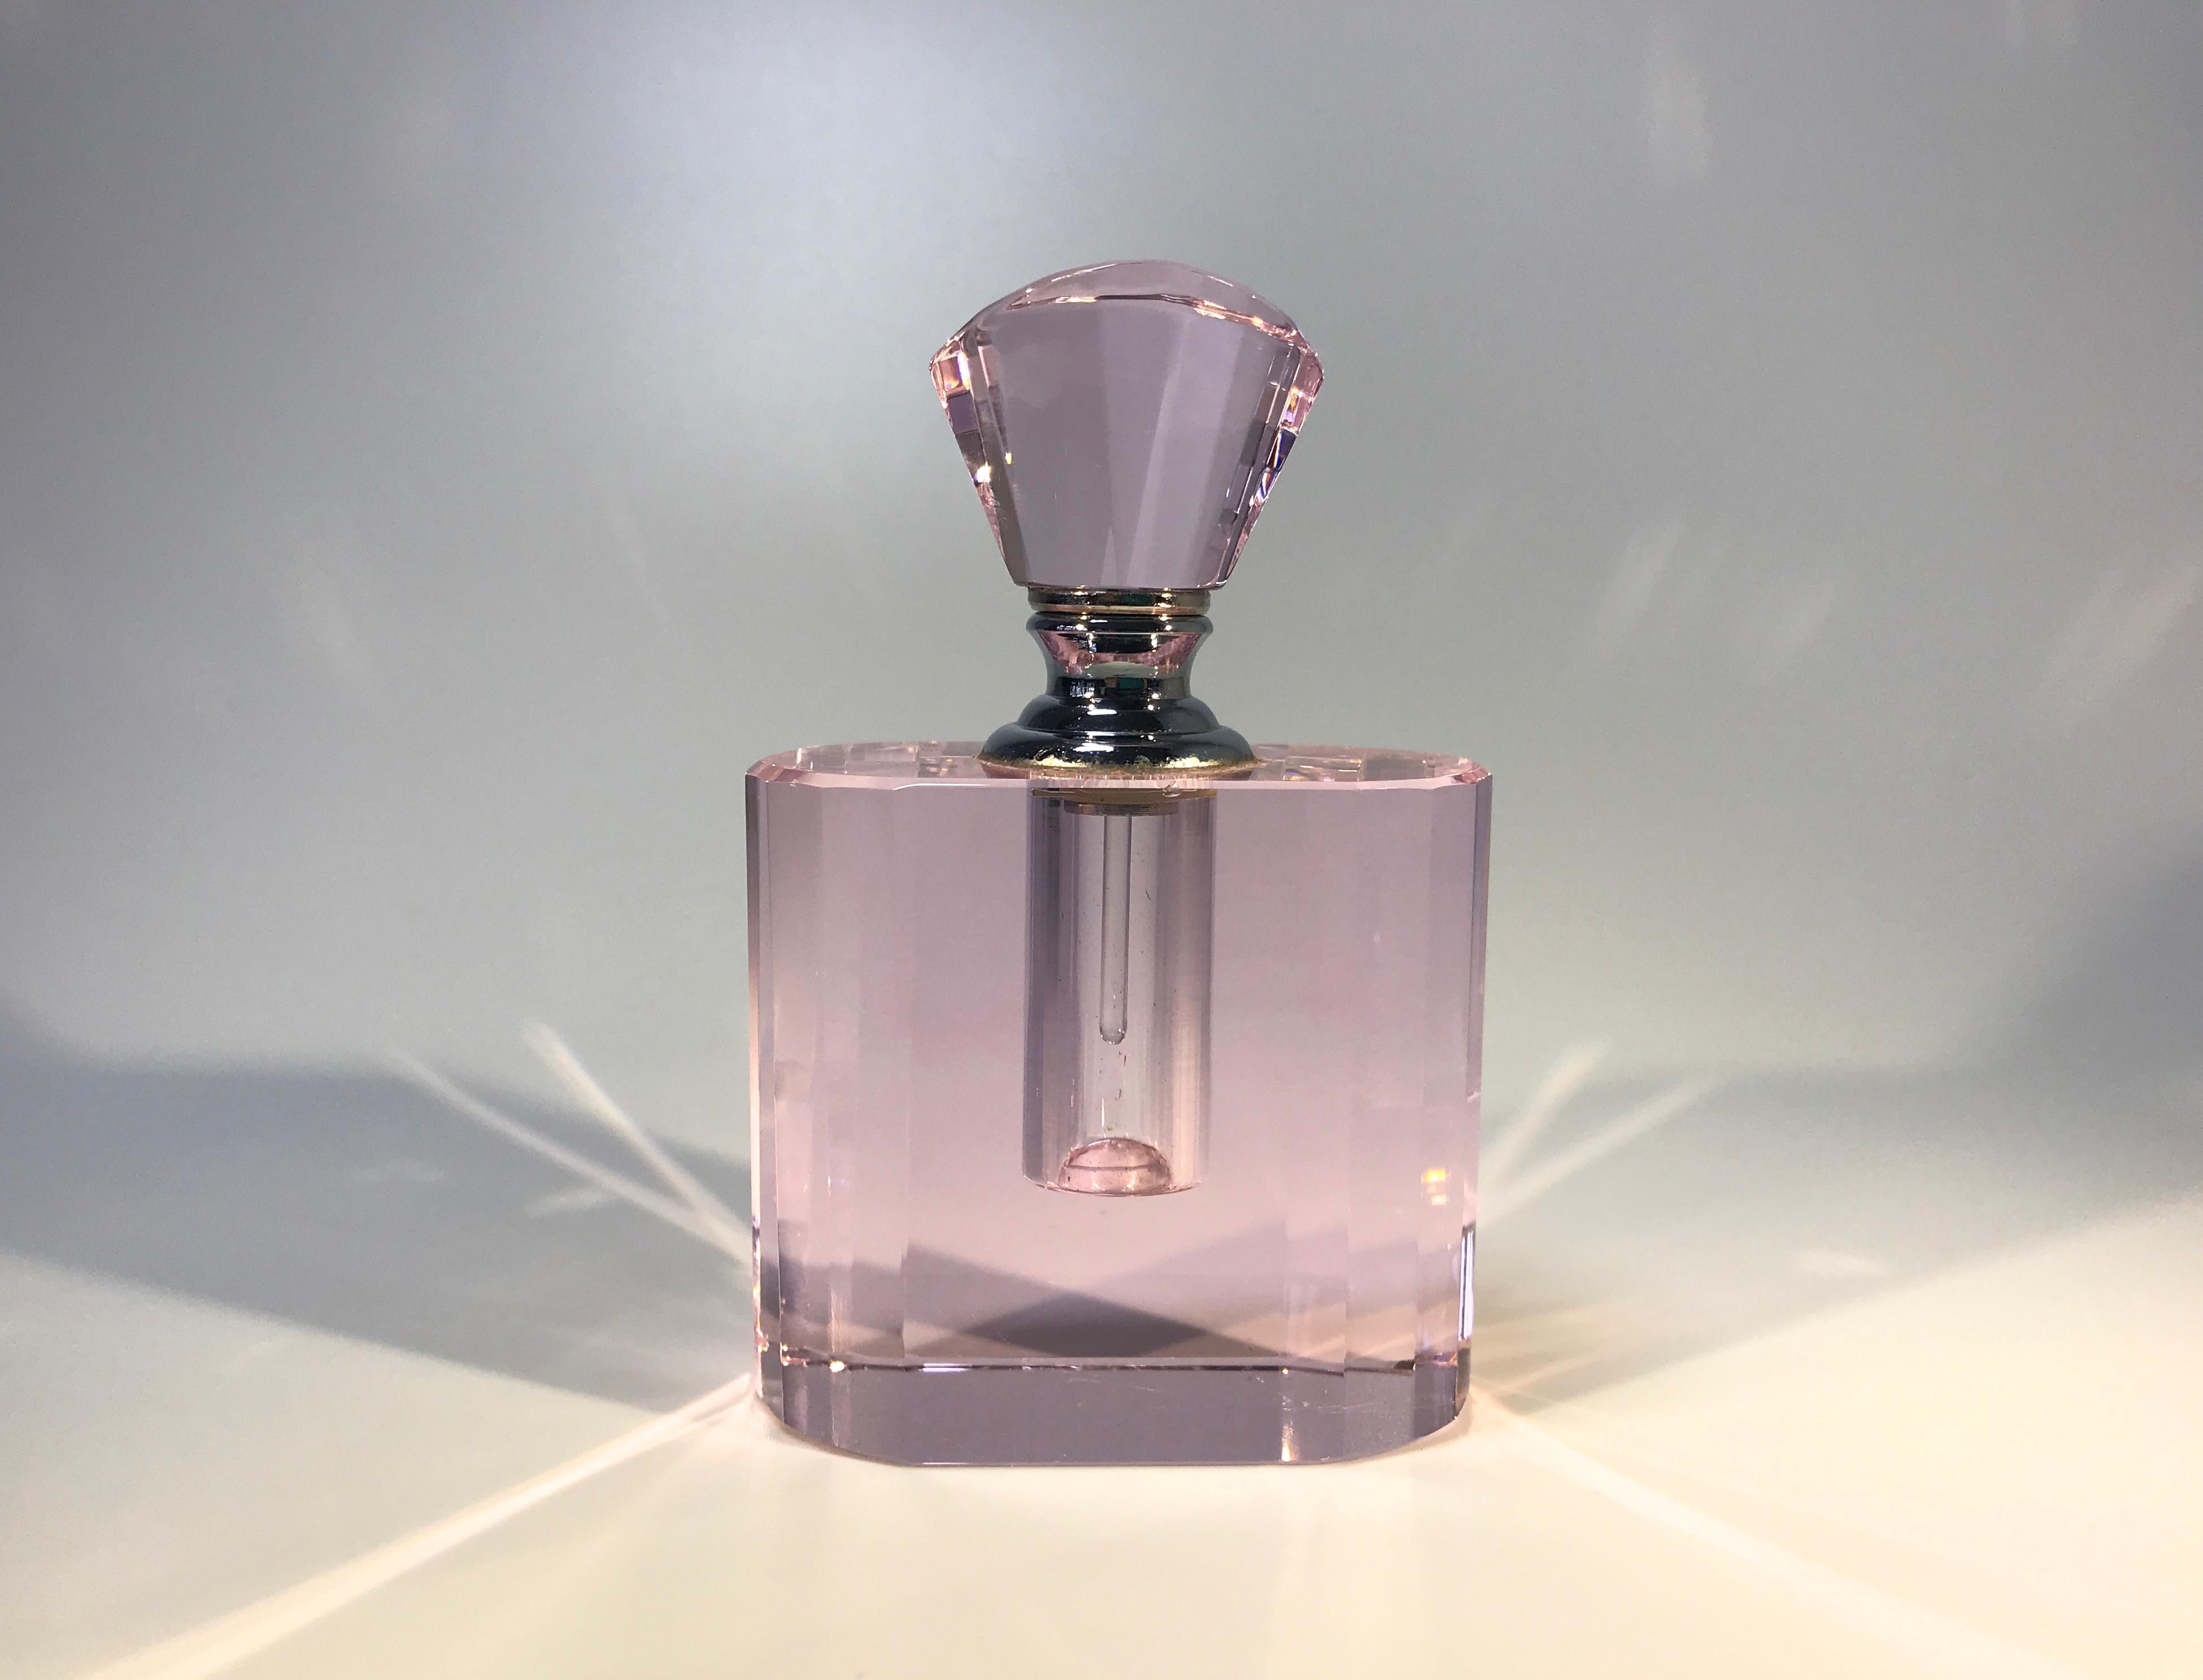 Elegant and stylish faceted rose pink crystal vintage perfume bottle
Silver coloured collar. The glass pipet faceted scent rod is in perfect condition
circa 1980s
Measures: Height 4 inch, width 2.5 inch, depth 1.5 inch
In very good condition and